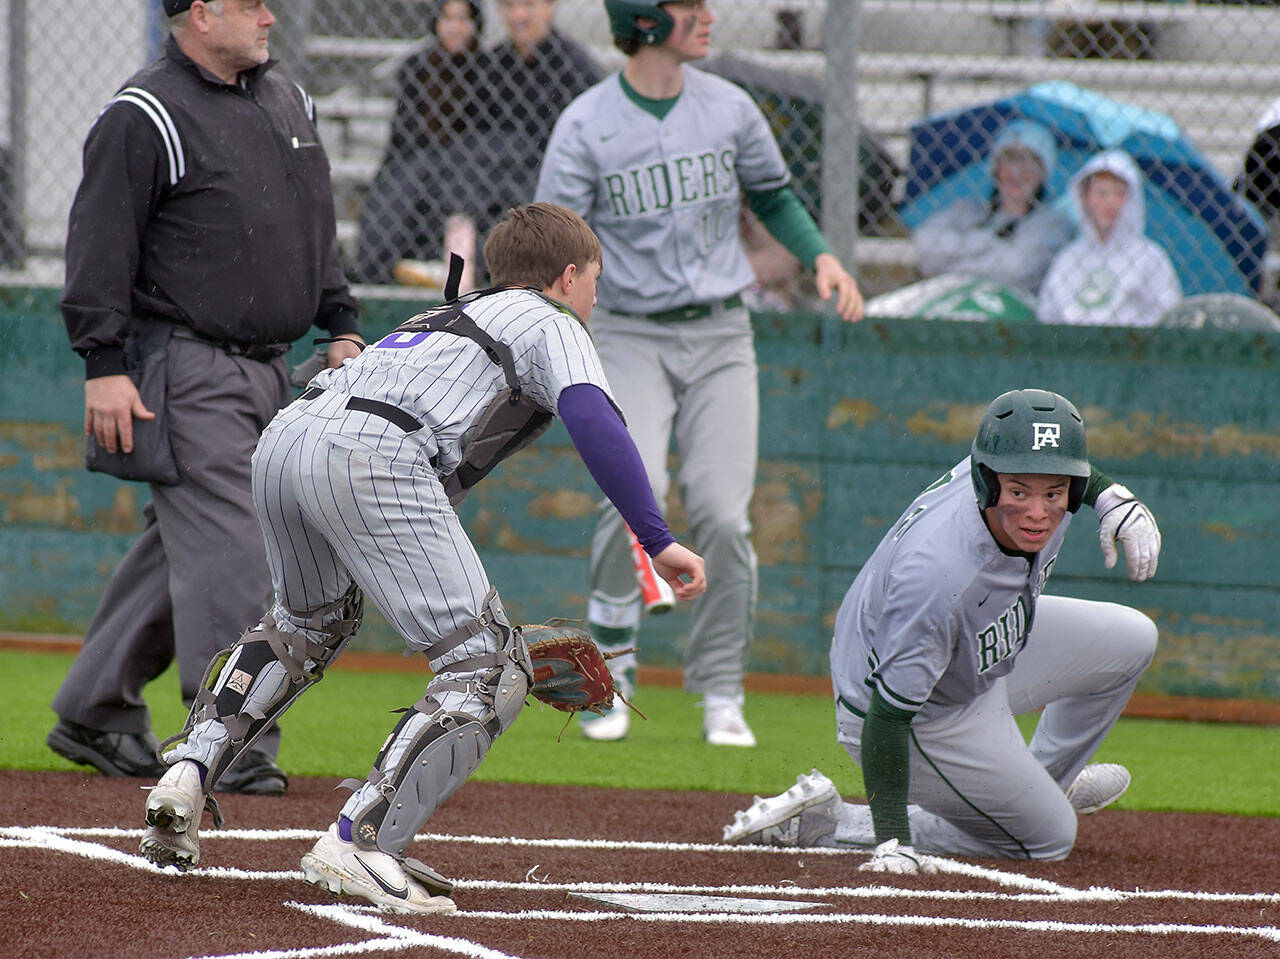 KEITH THORPE/PENINSULA DAILY NEWS Port Angeles’ Kaleb Mullen, right, looks back at North Kitsap catcher Greyson Prichard after making it home in the second inning as Mullen’s teammate, Rylan Politika waits to bat on Tuesday at Volunteer Field.